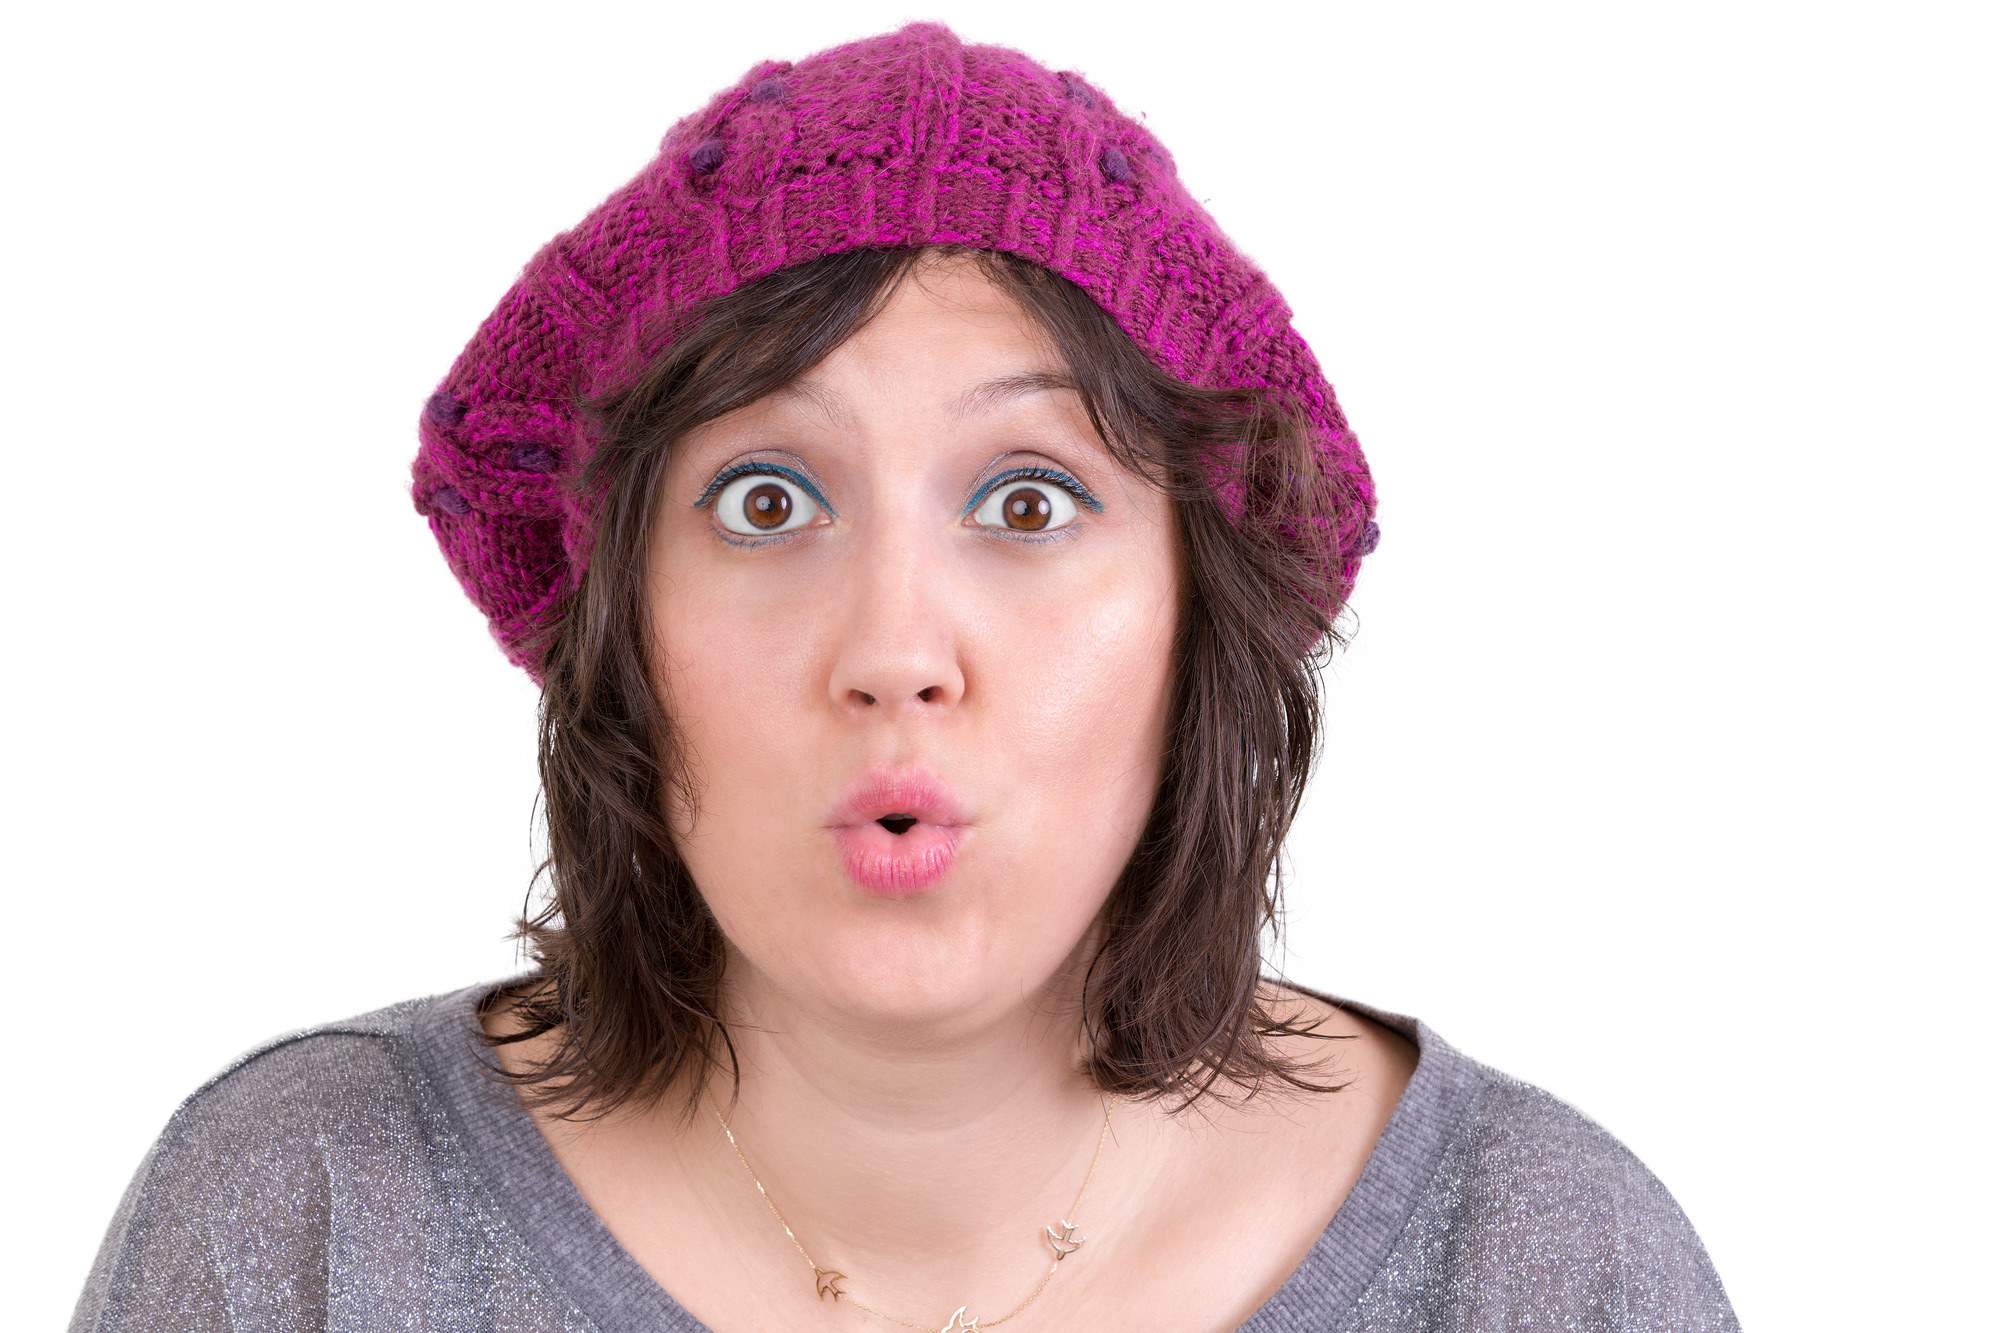 Woman wearing a purple knitted beanie reacting in amazement and wonder puckering her lips into an ooh expression with wide eyes, on white